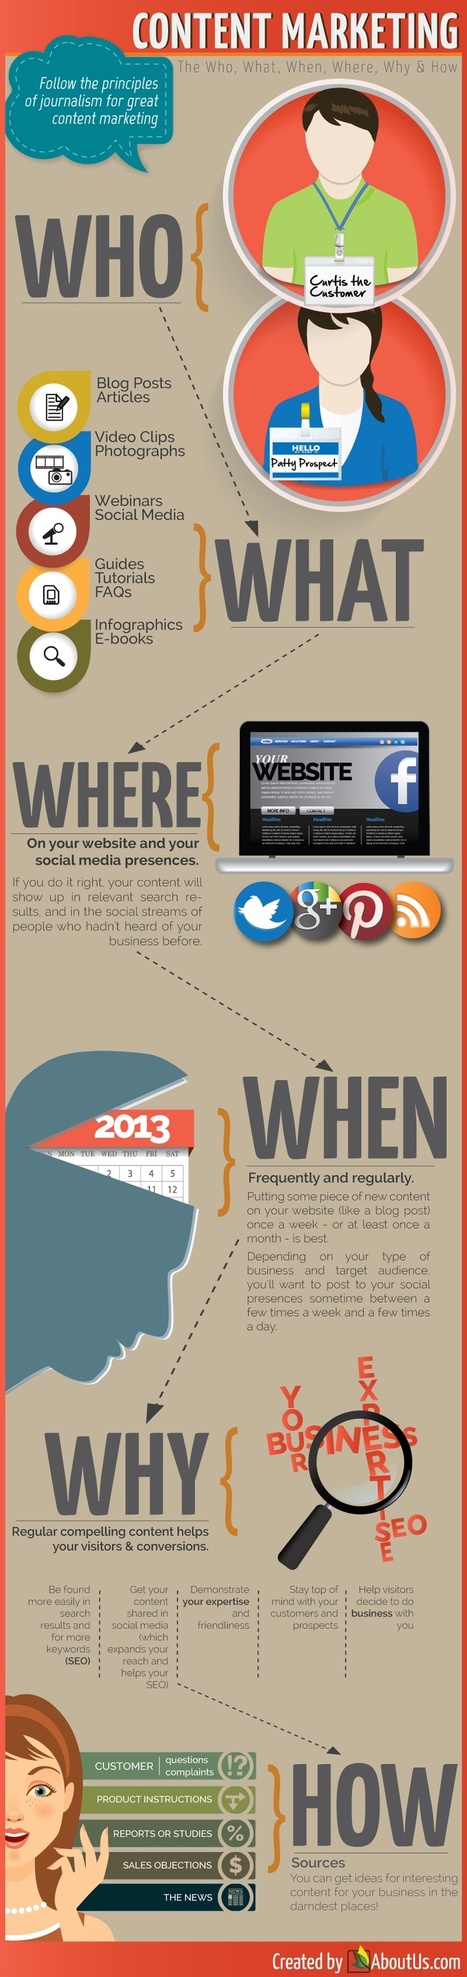 Content Marketing Is The New SEO [Infographic] | Writing_me | Scoop.it